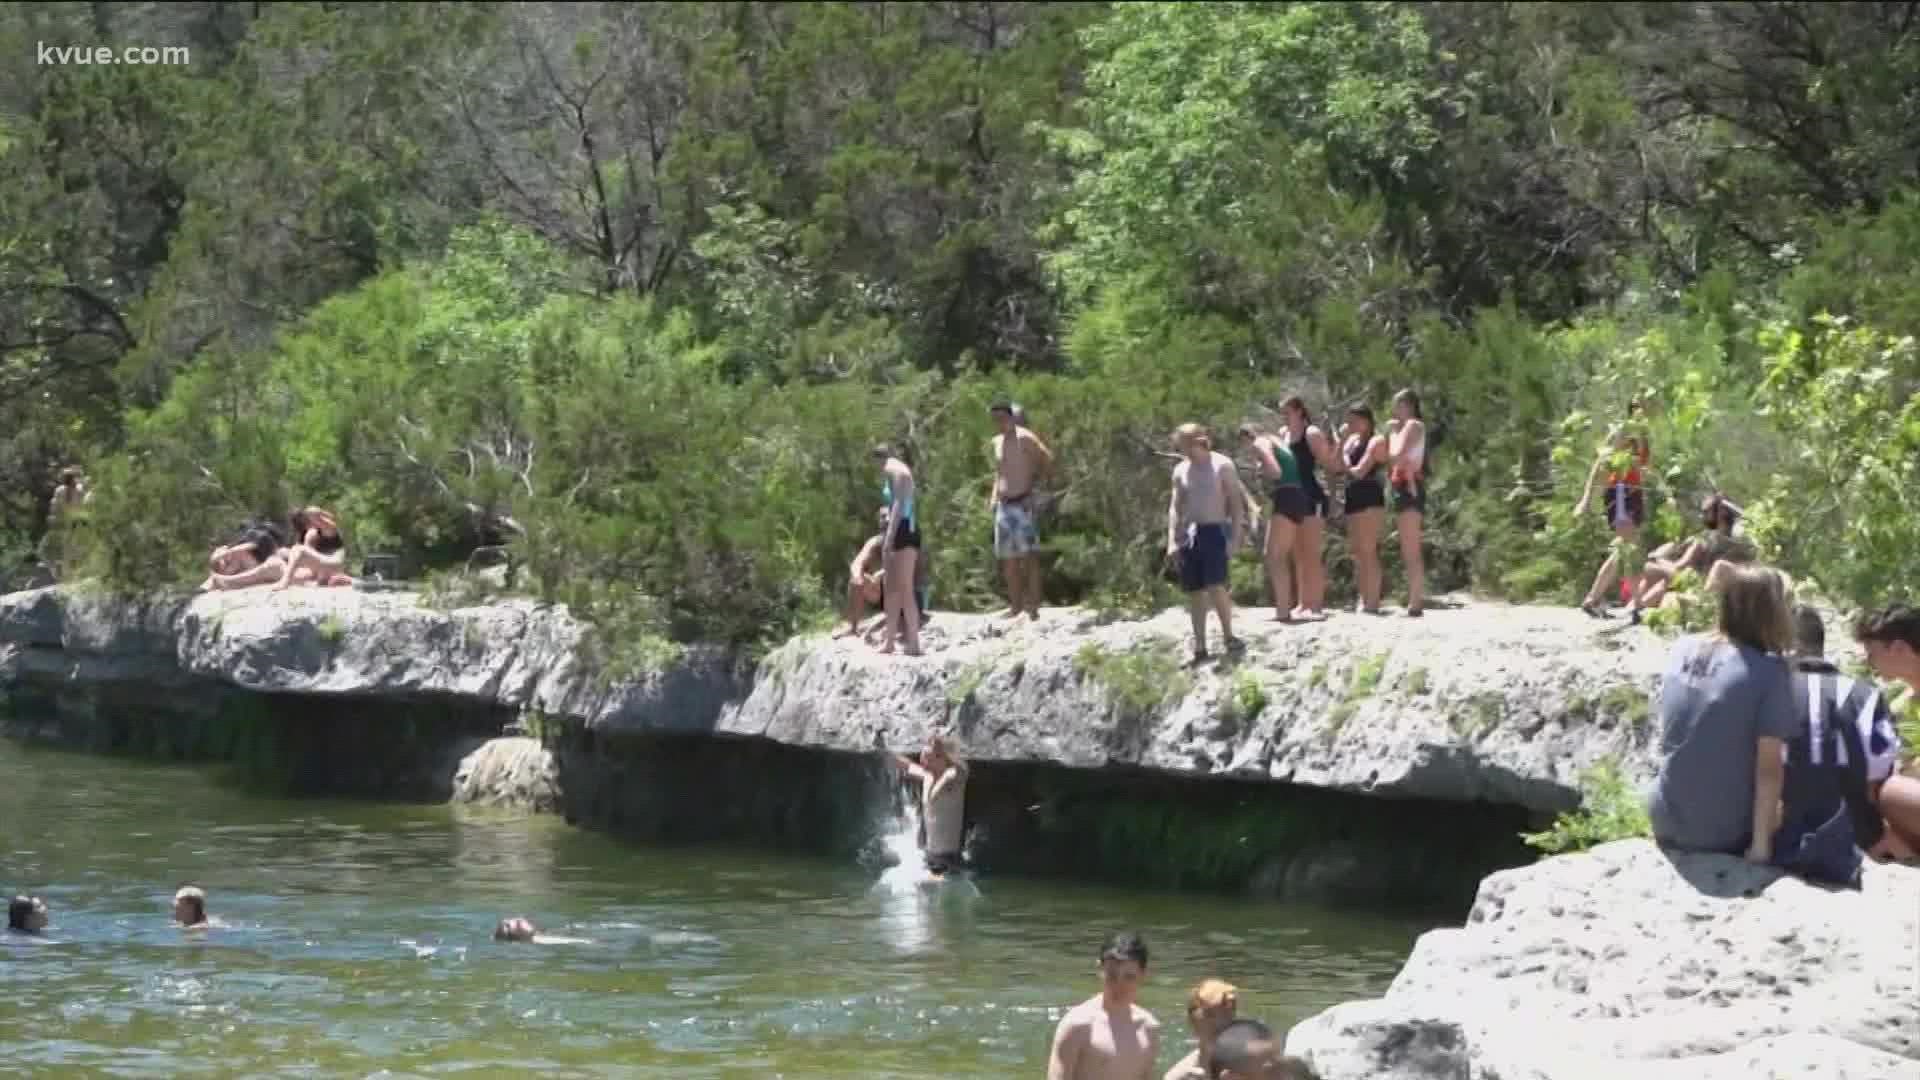 Harmful toxins linked to blue-green algae were found in the water at Sculpture Falls this month.